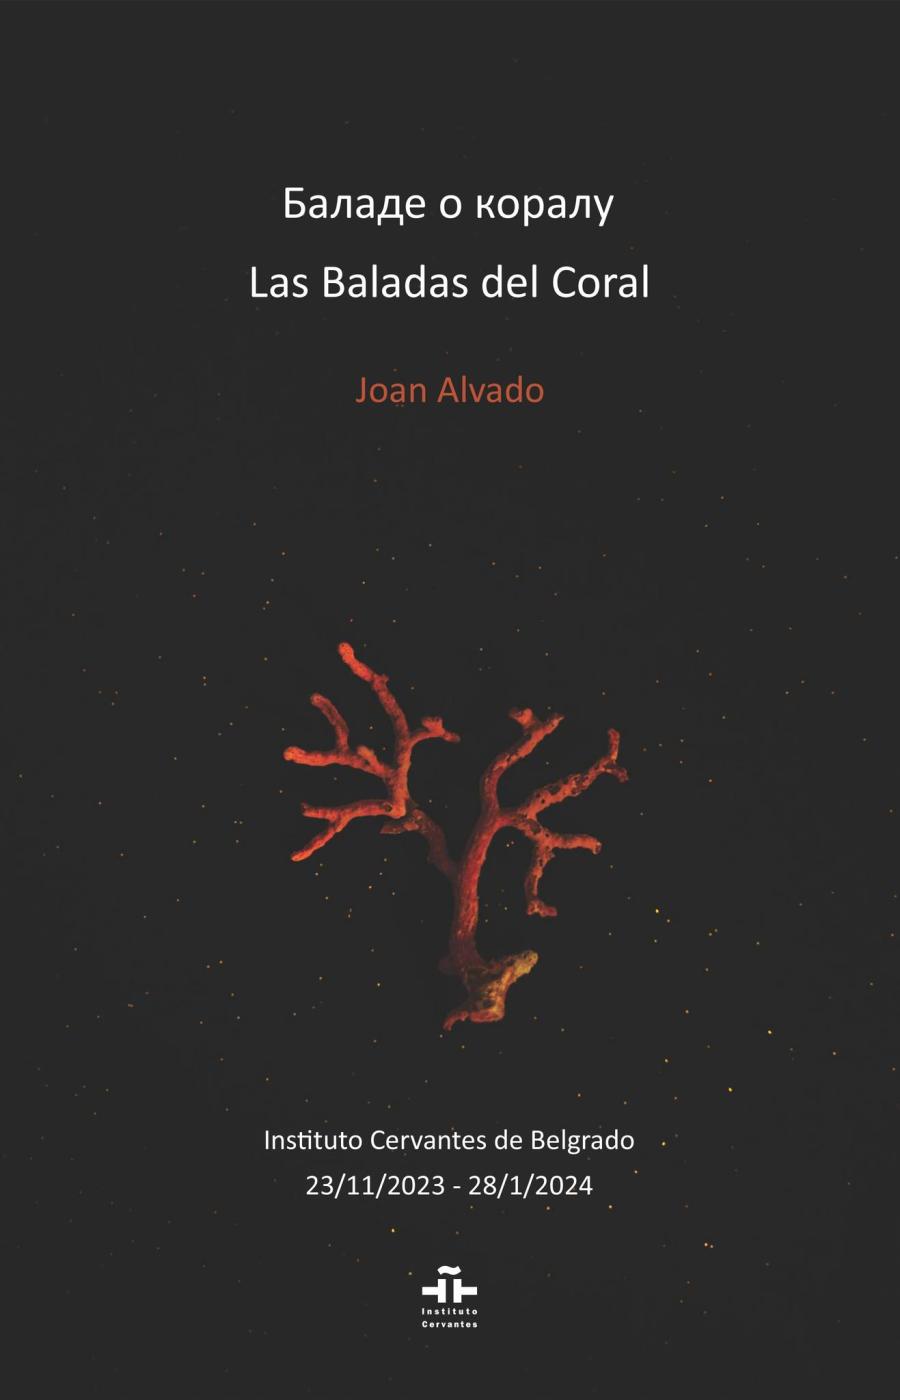 "The Ballads of the Coral", exhibition in Belgrade. 